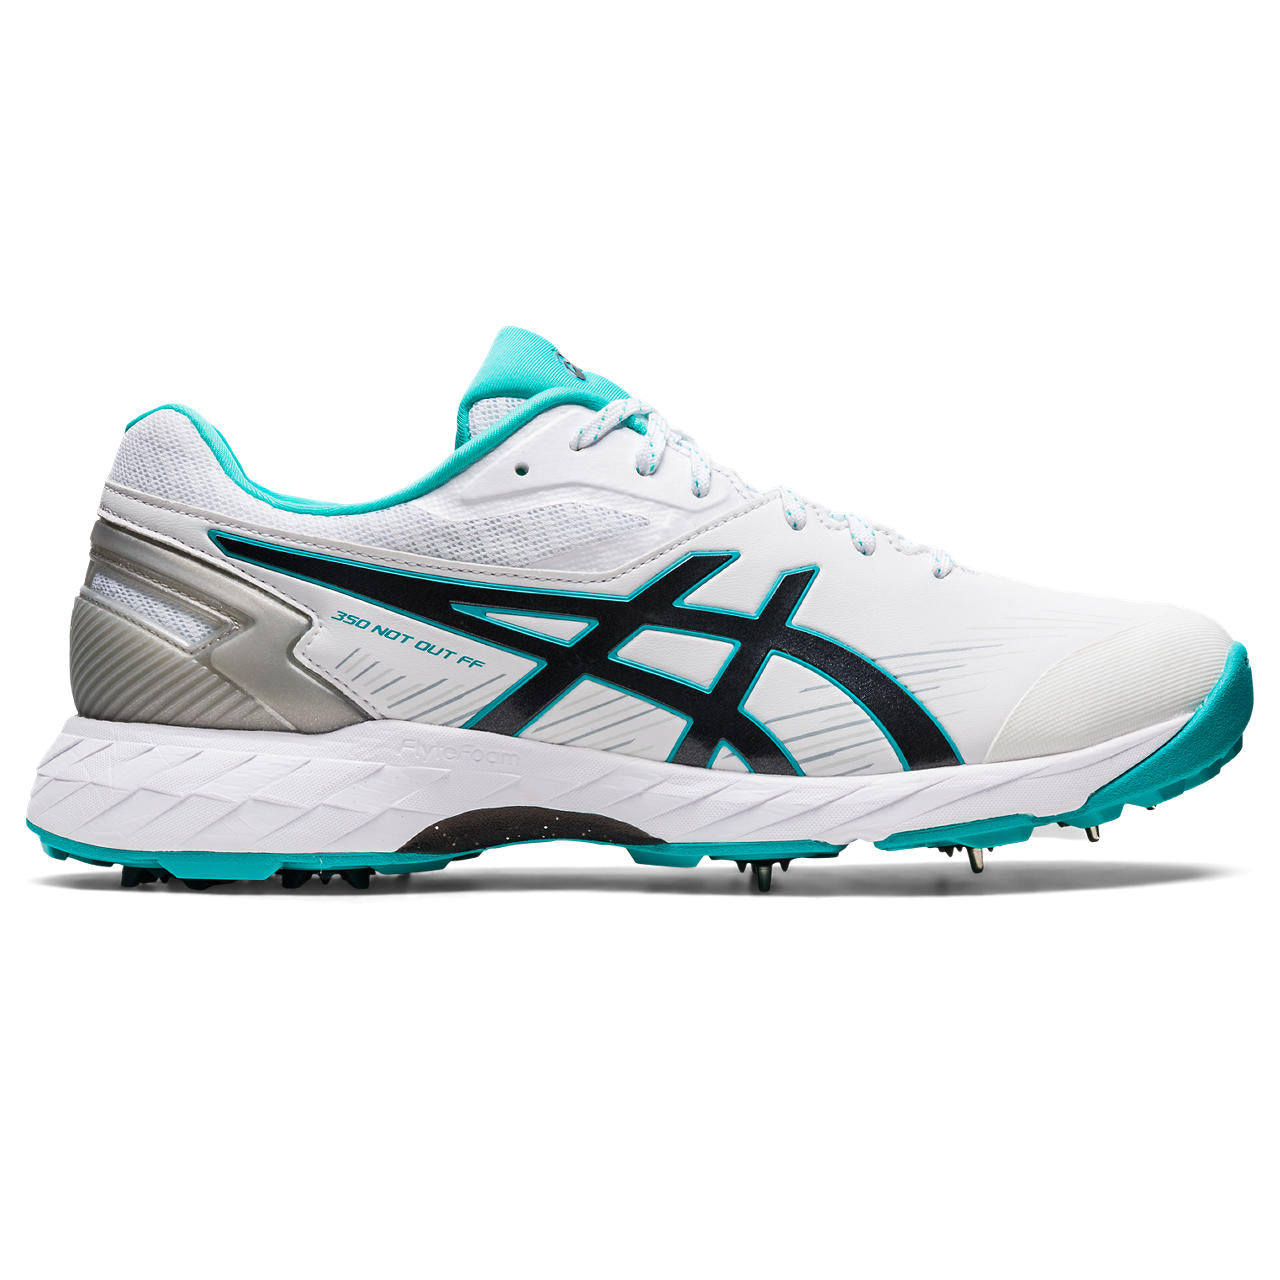 Asics Gel 350 Not Out Cricket Spikes White/Sky Blue